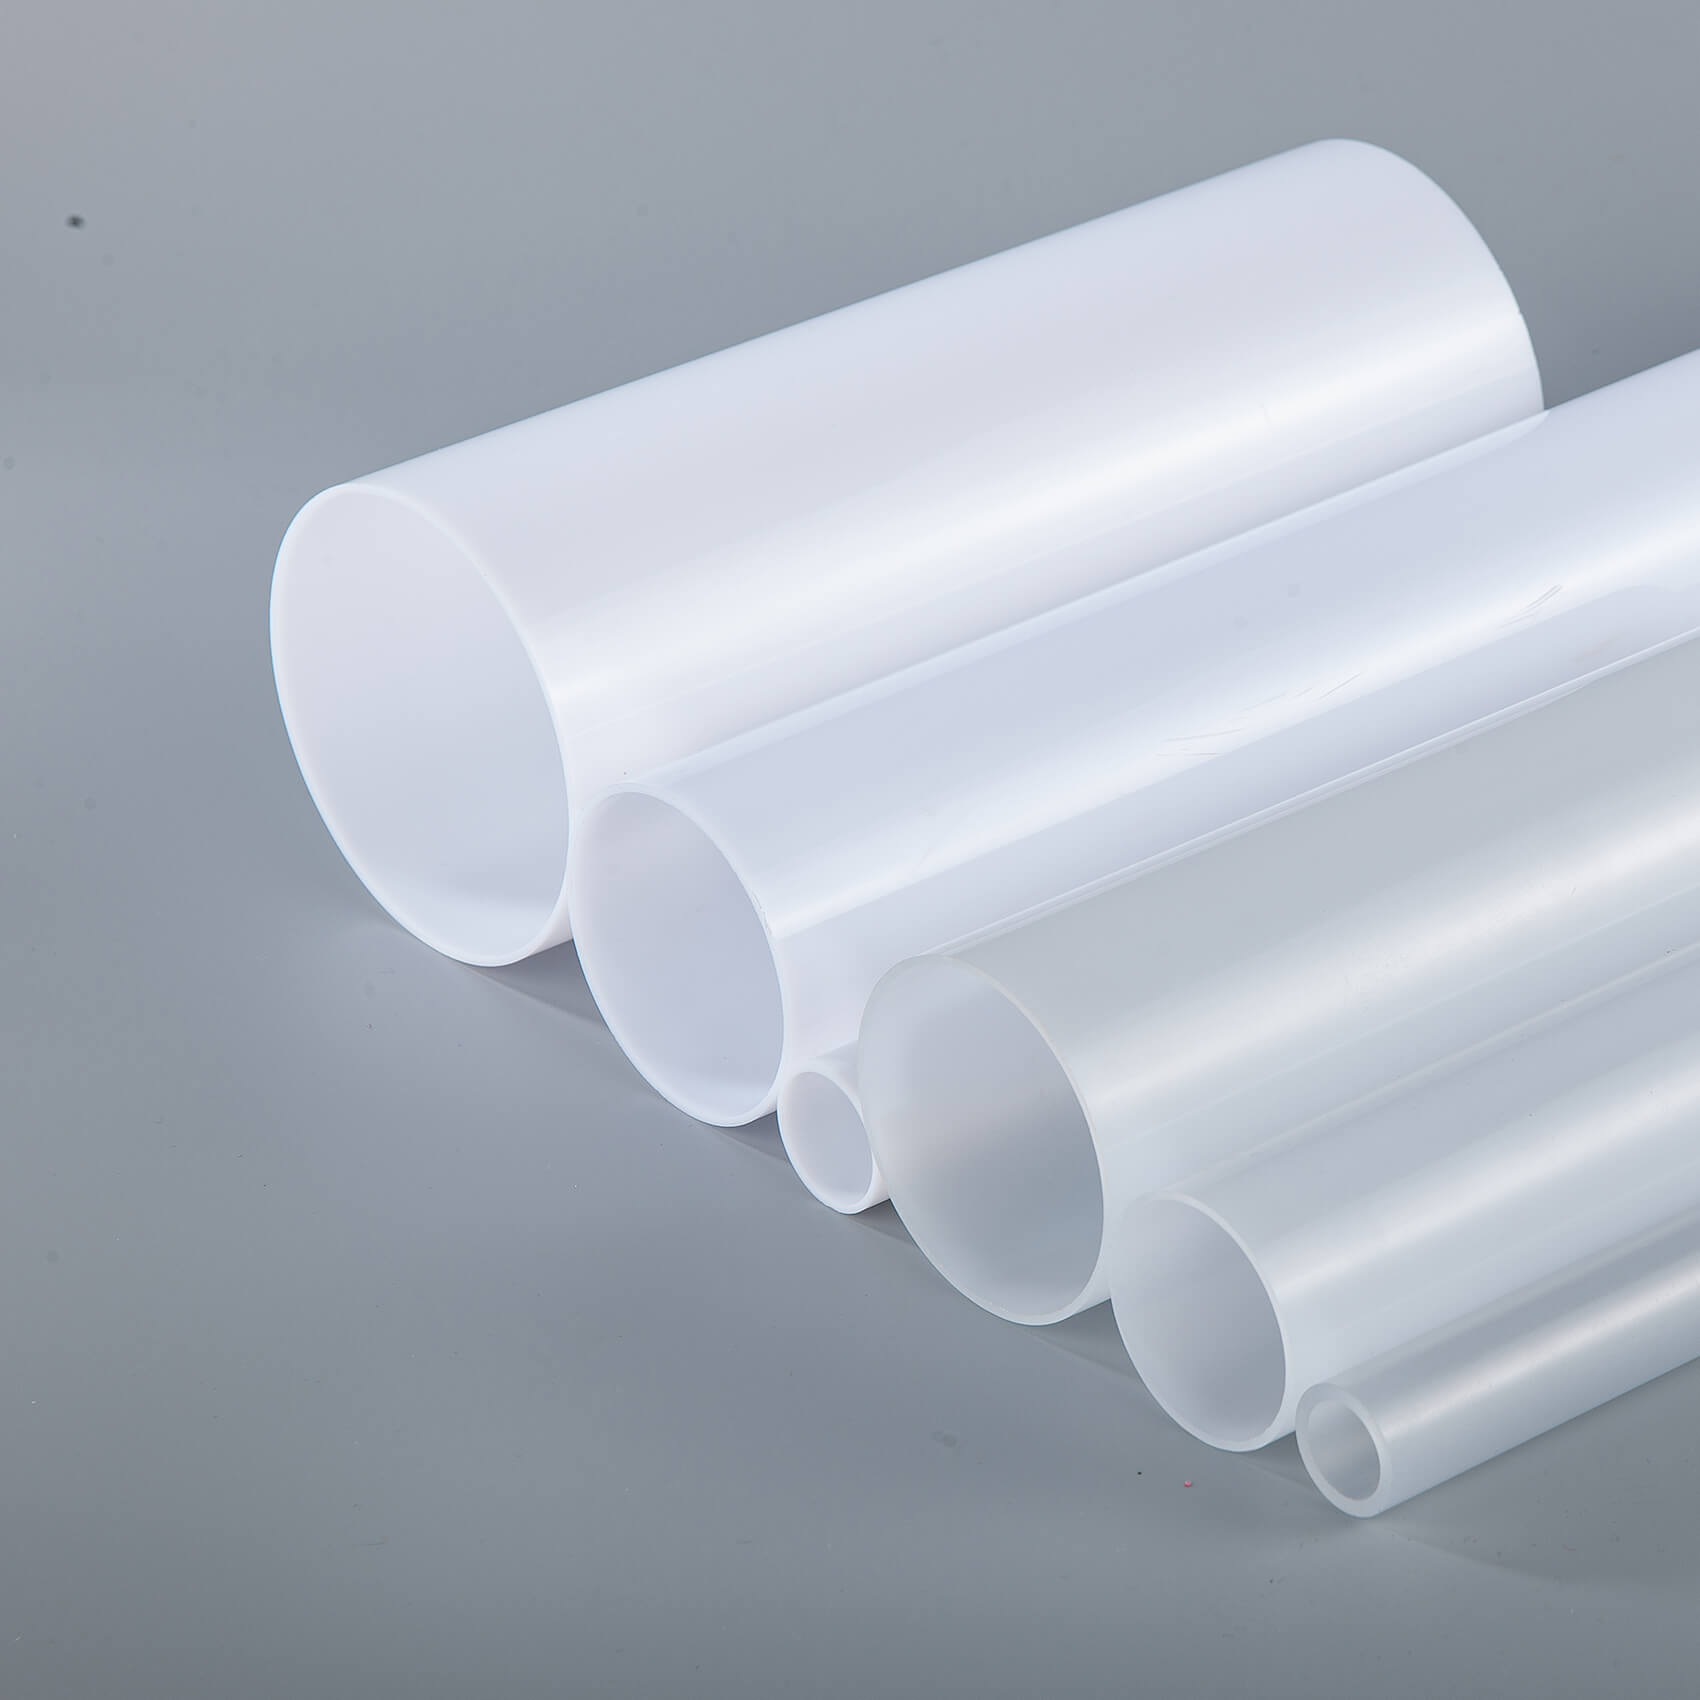 Mingshi extruded polycarbonate diffused tubes